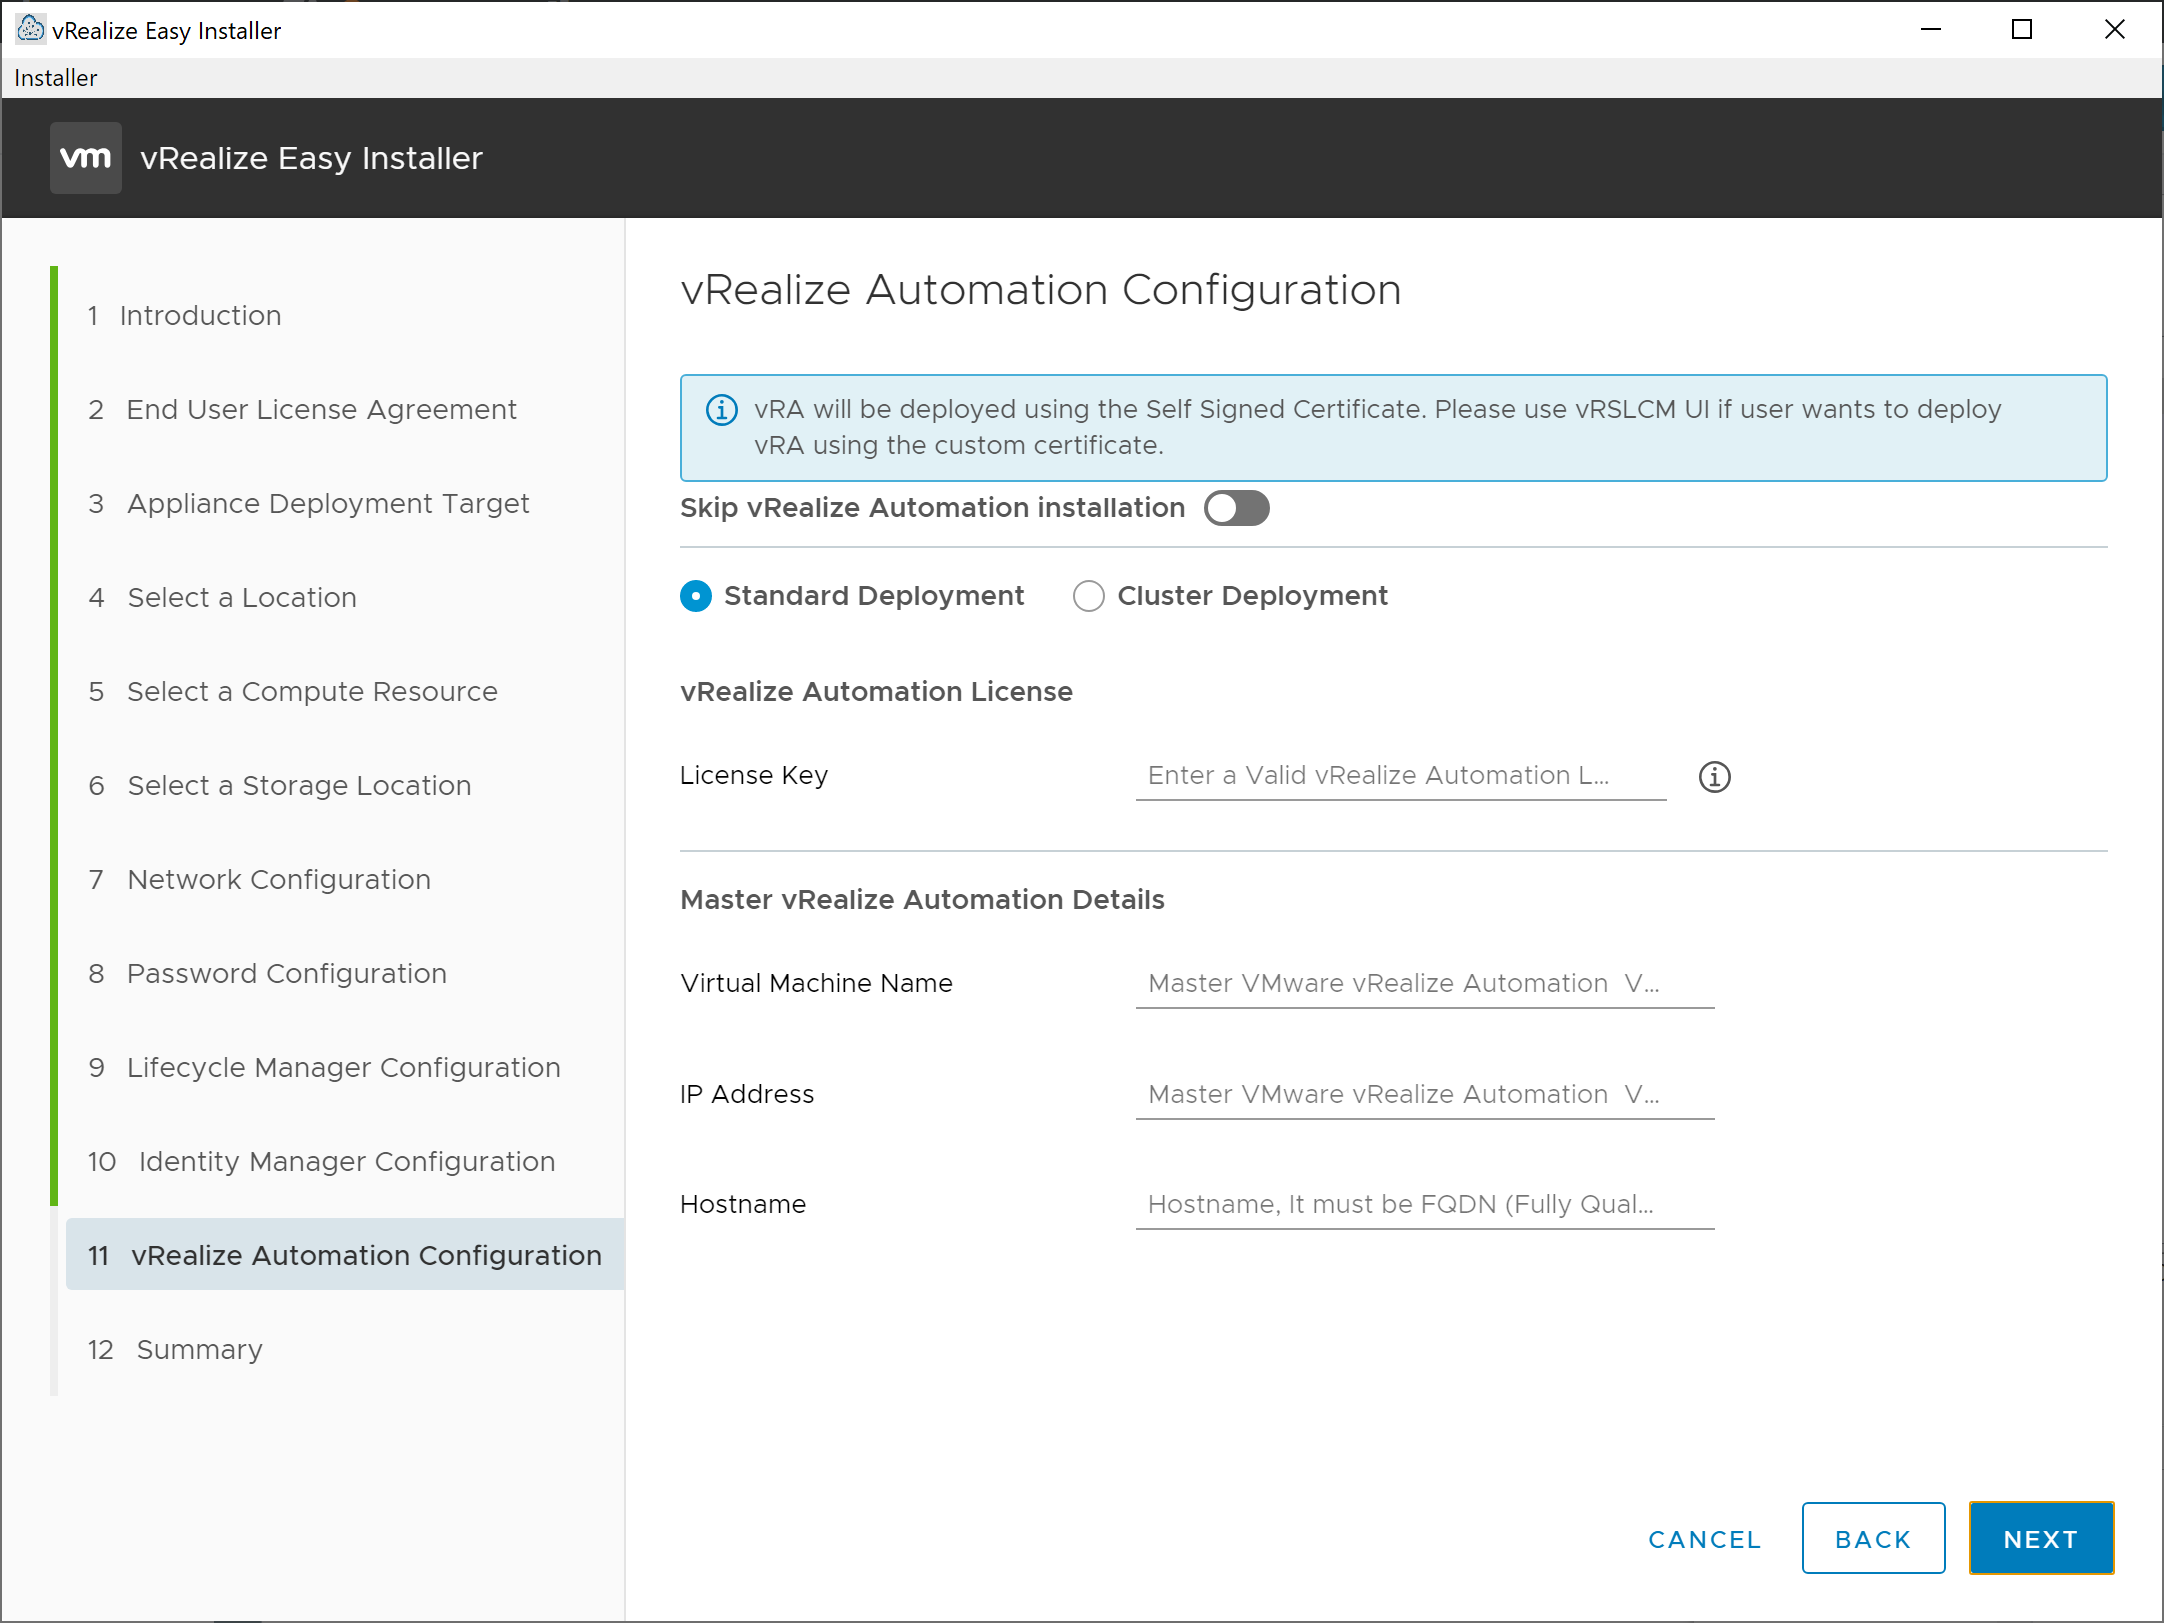 vRealize Easy Installer - New Install - vRealize Automation Configuration